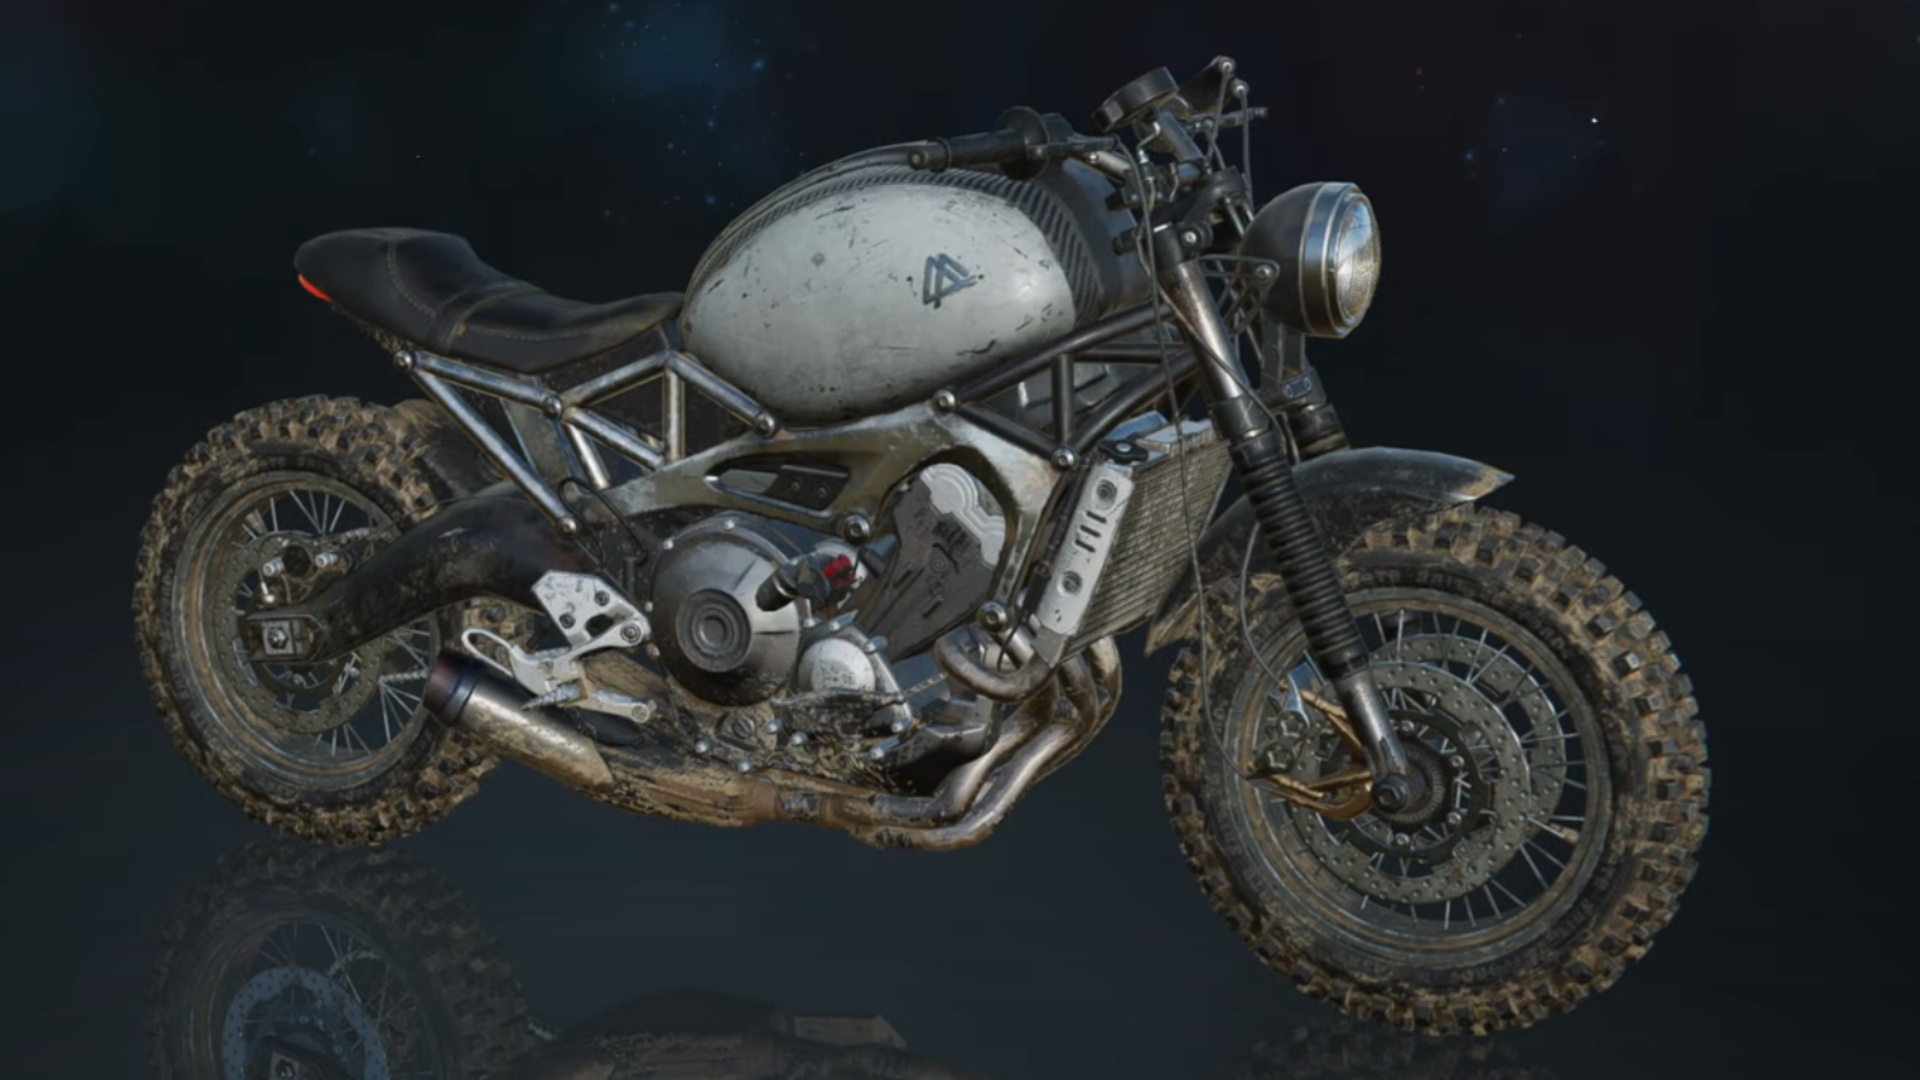 Crafting a motorcycle in Once Human